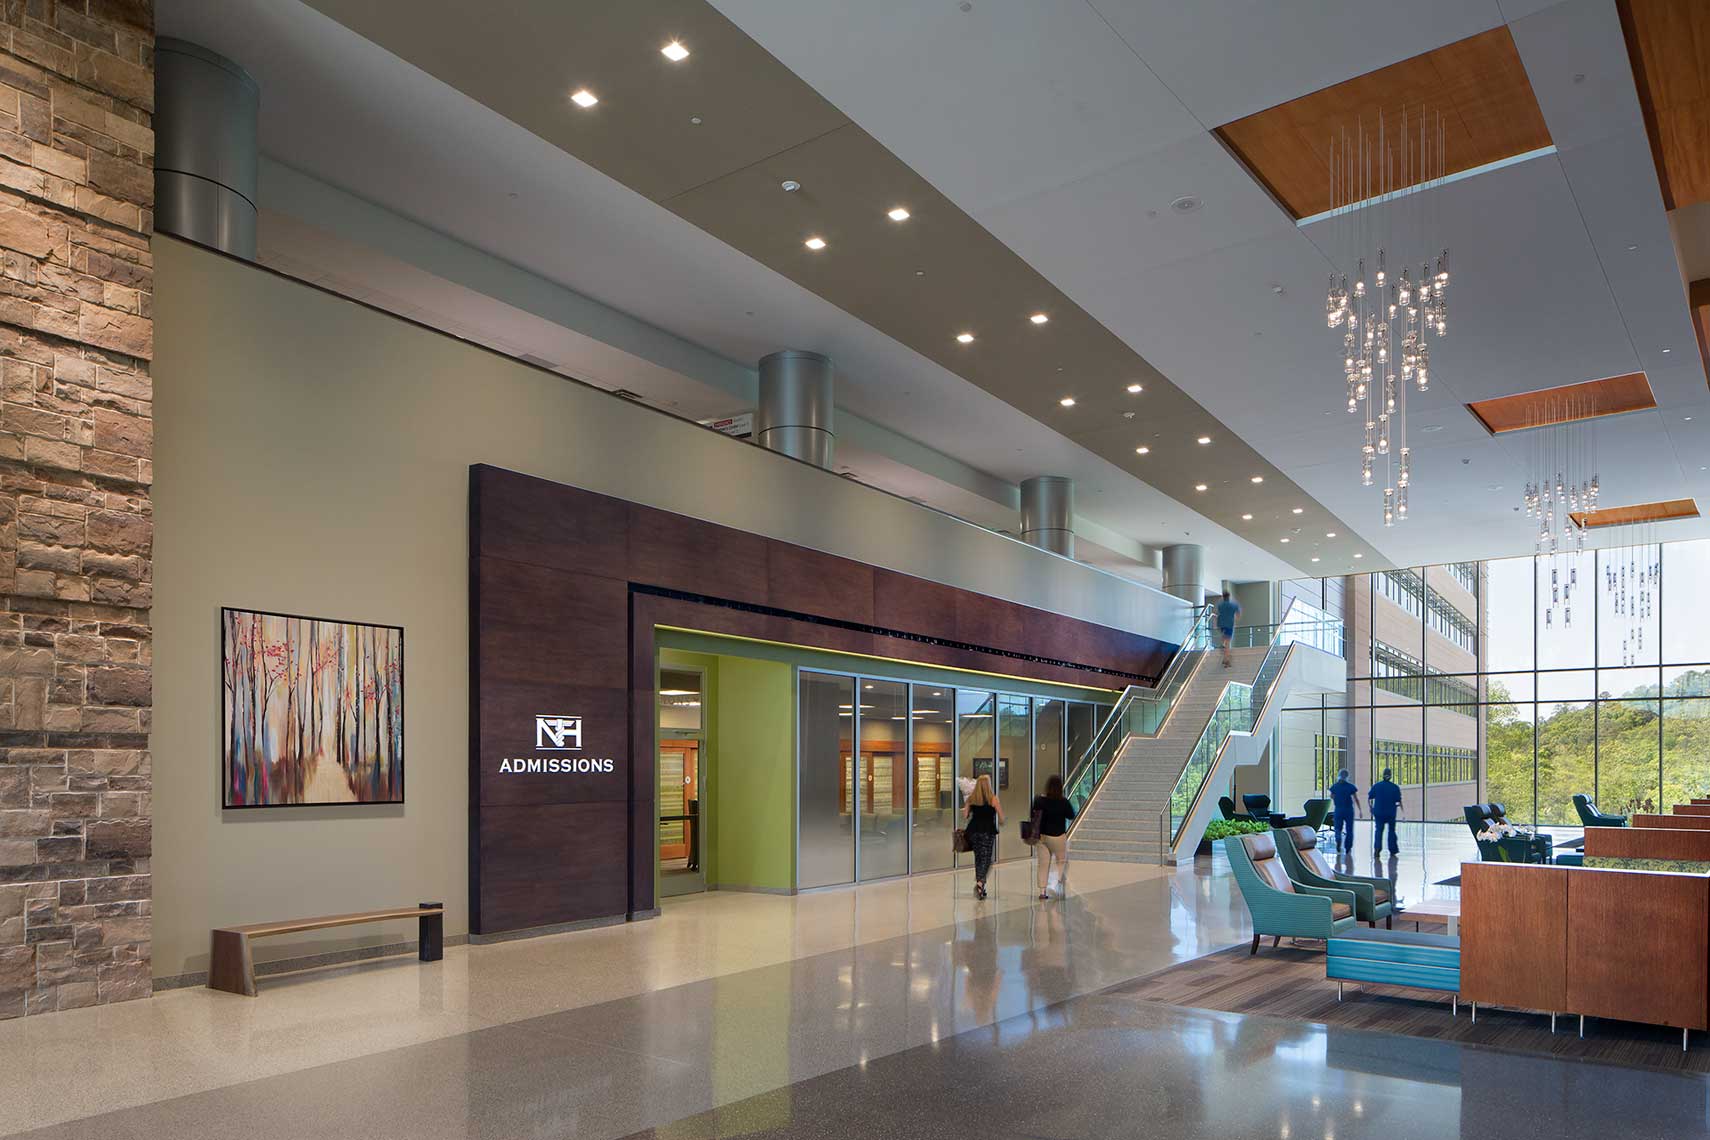 A comprehensive image of the Northside Hospital Cherokee Admissions area and lobby